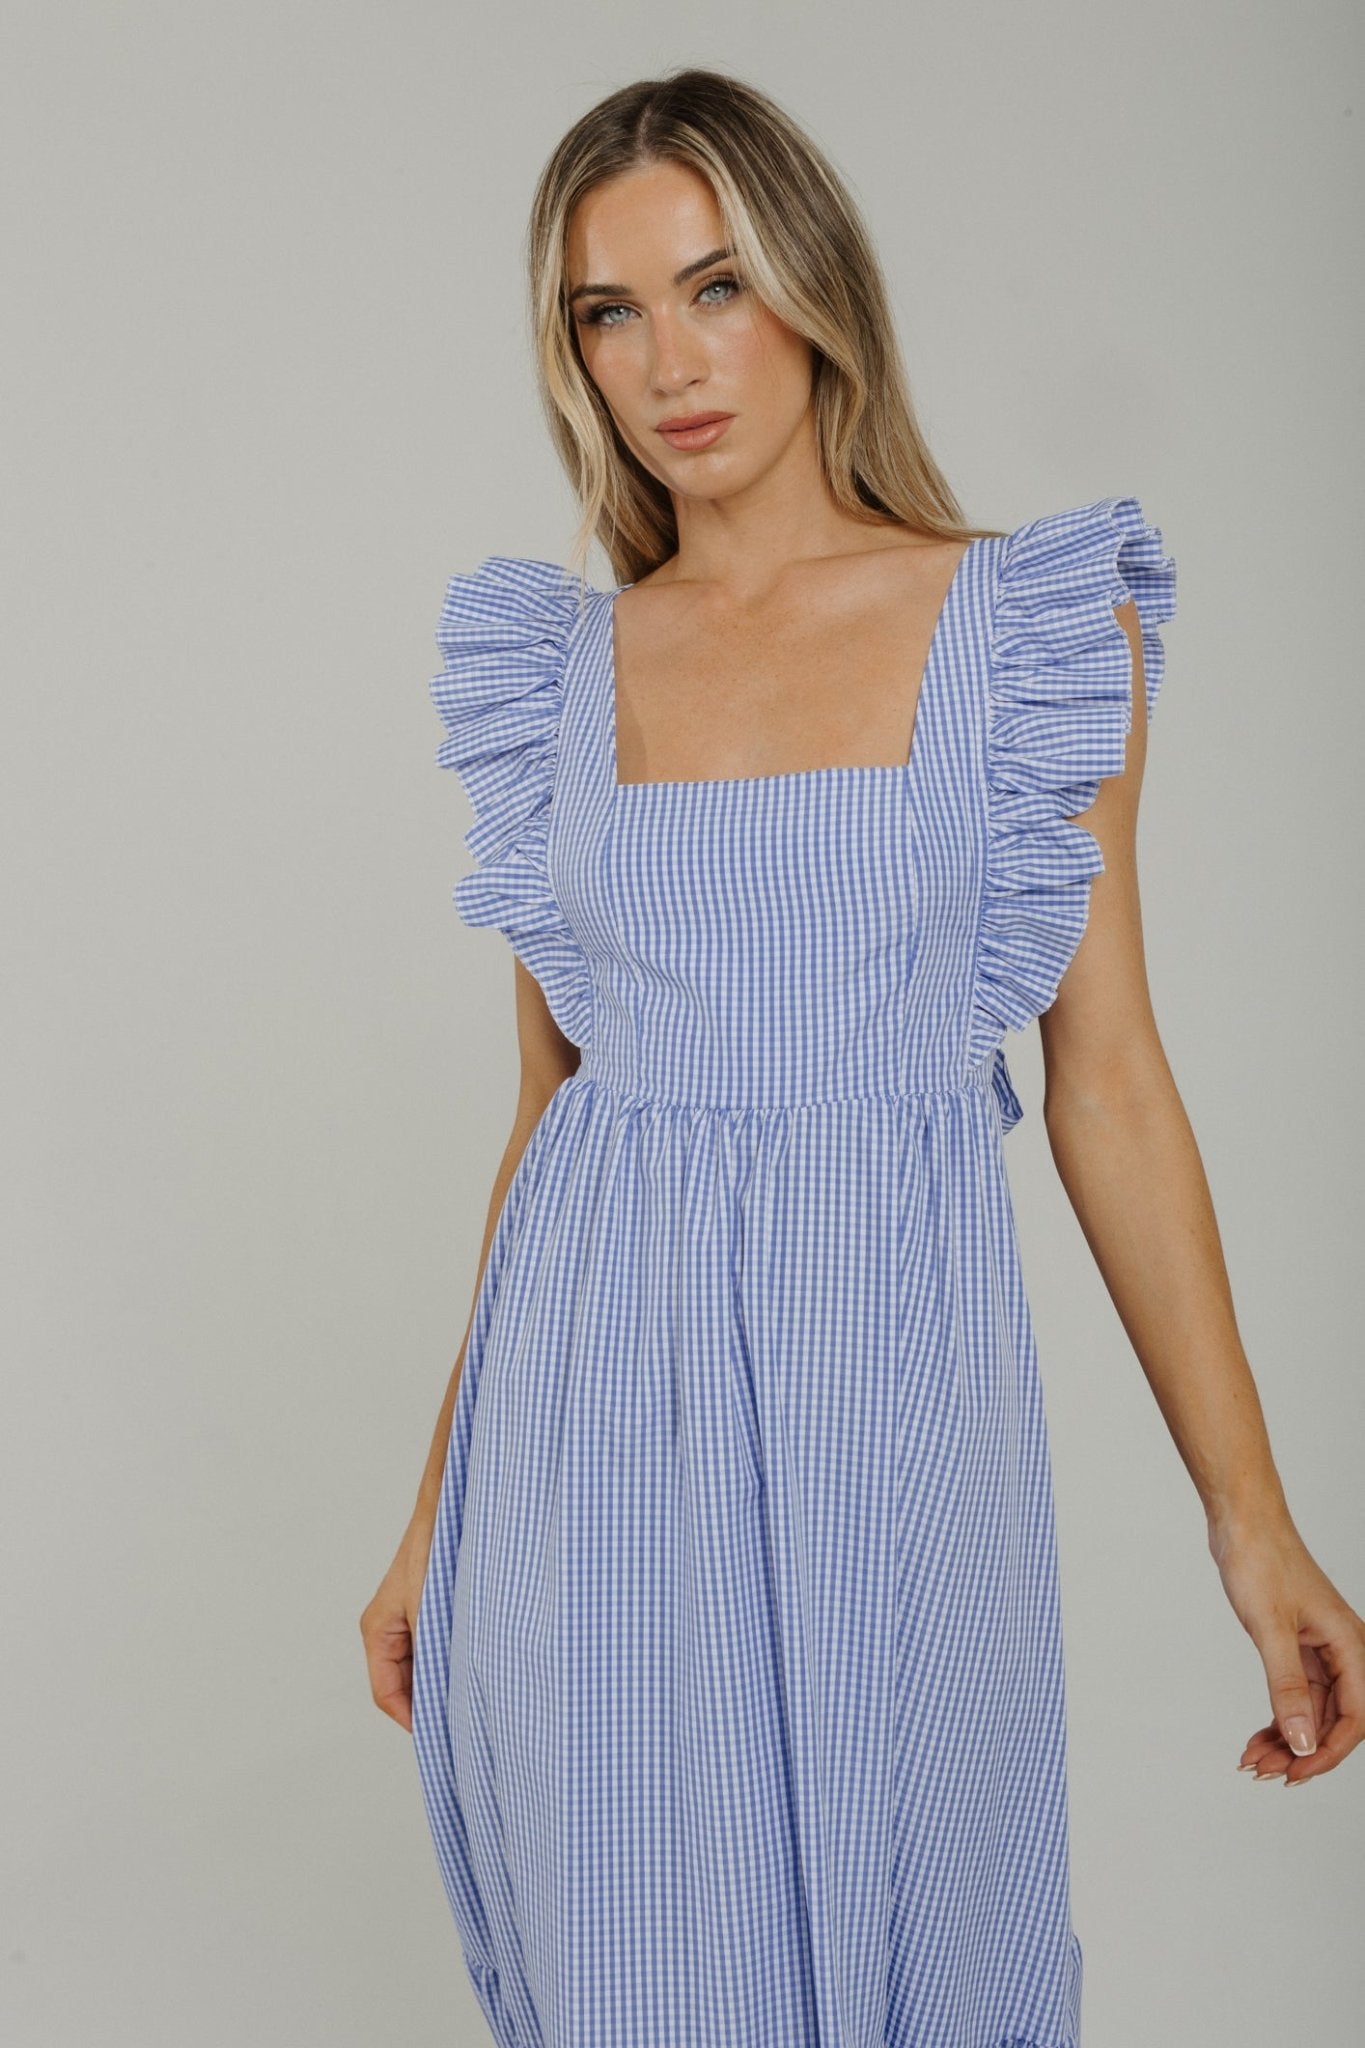 Indie Frill Sleeve Dress In Blue Gingham - The Walk in Wardrobe